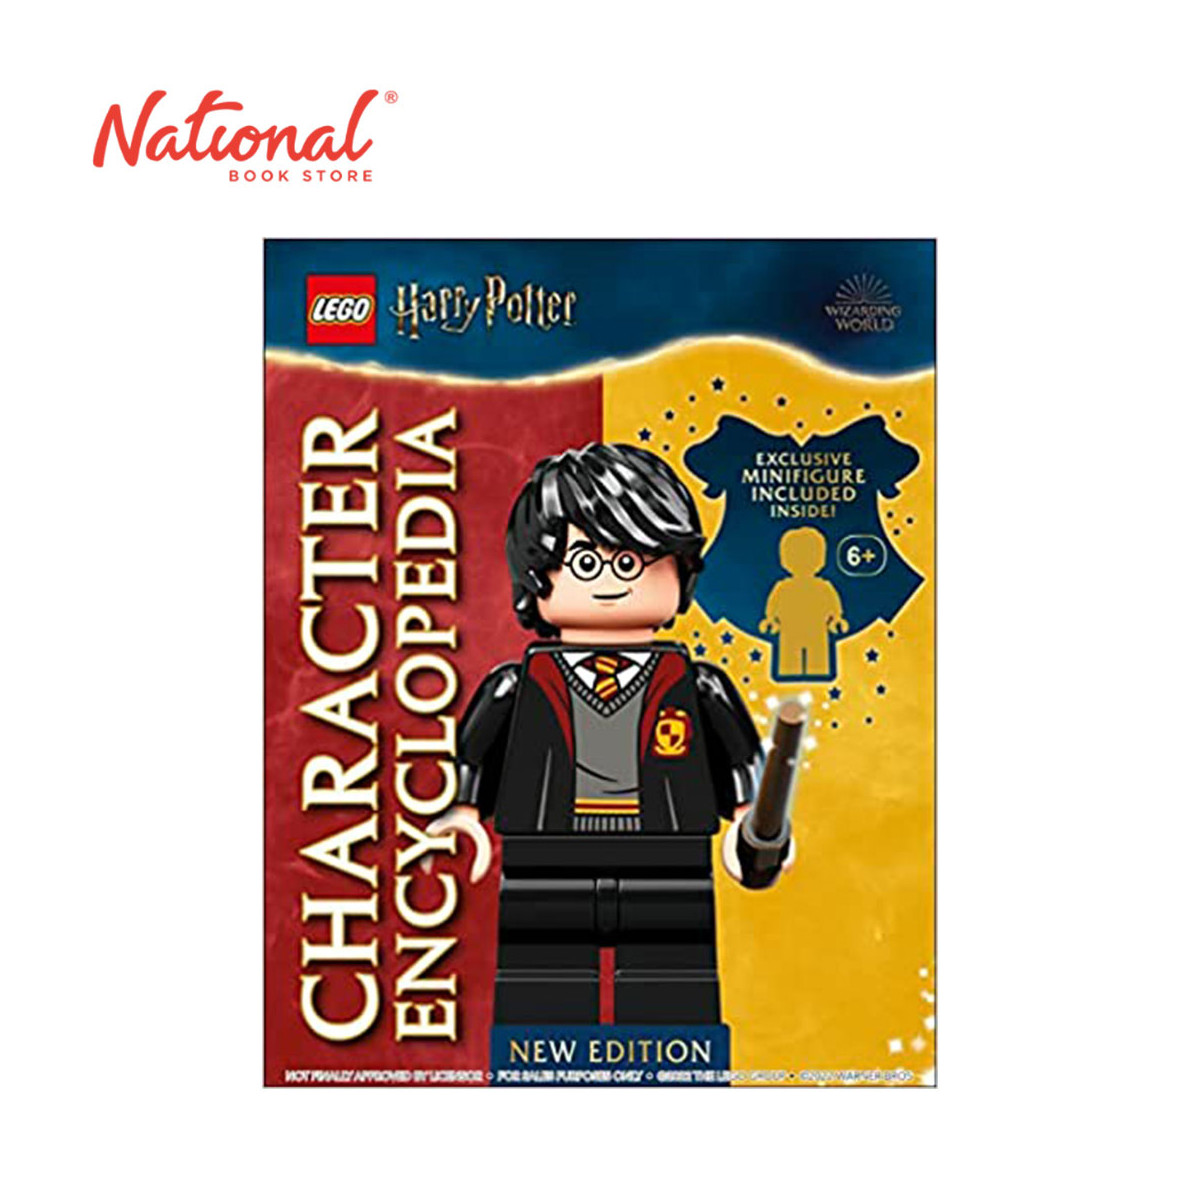 Lego Harry Potter Character Encyclopedia New Edition By Elizabeth Dowsett - Hardcover